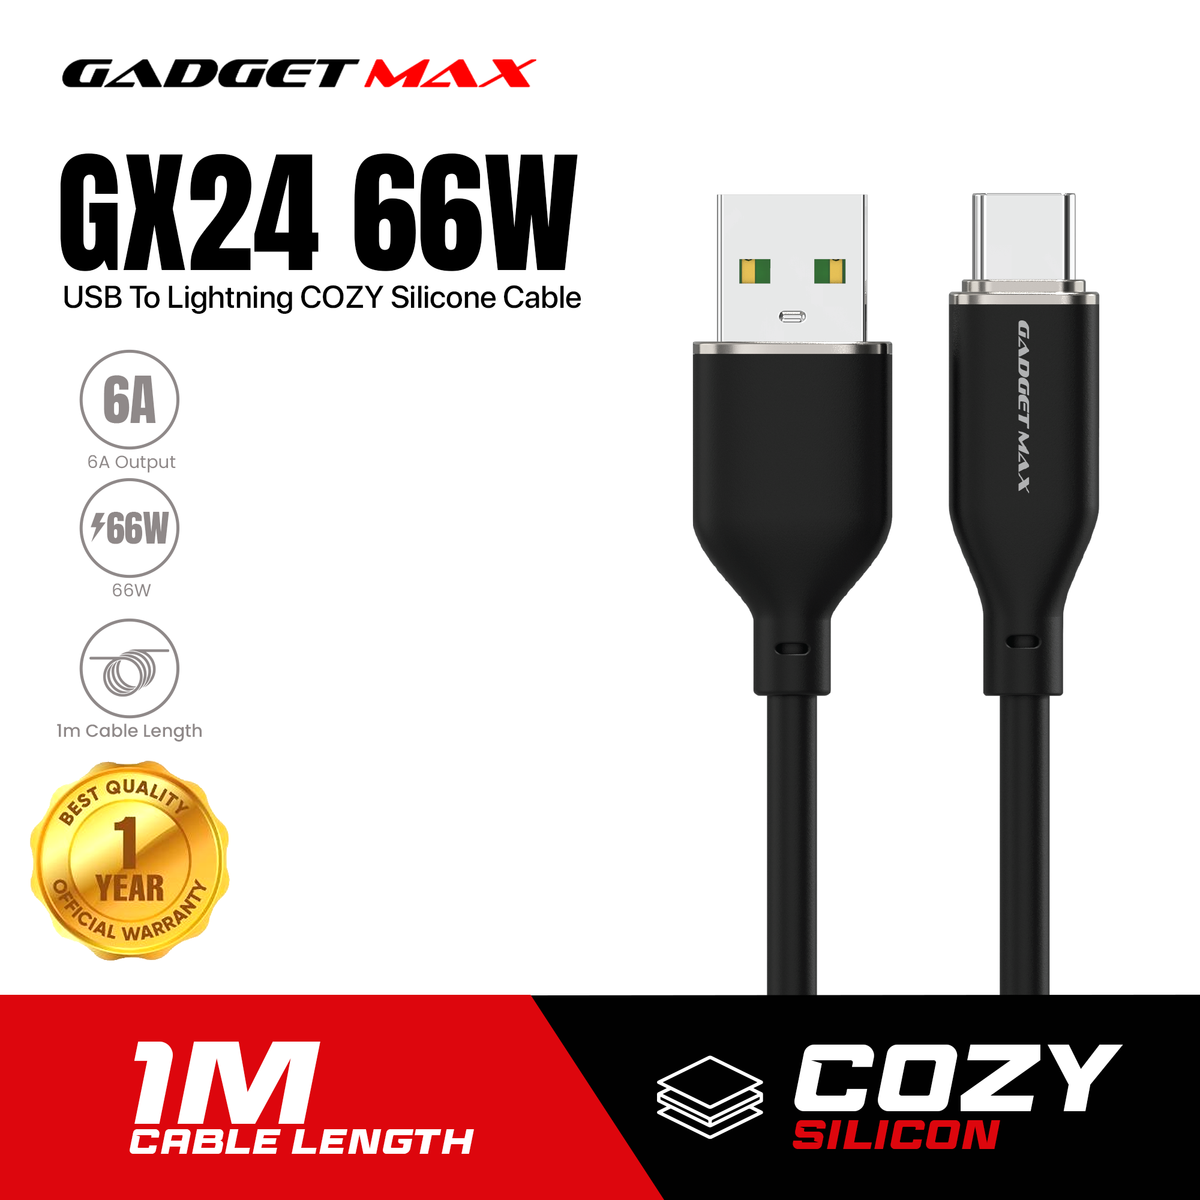 GADGET MAX GX24 66W USB TO TYPE C 6A MAX COZY SILCONE CABLE (6A )(1M) - BLACK